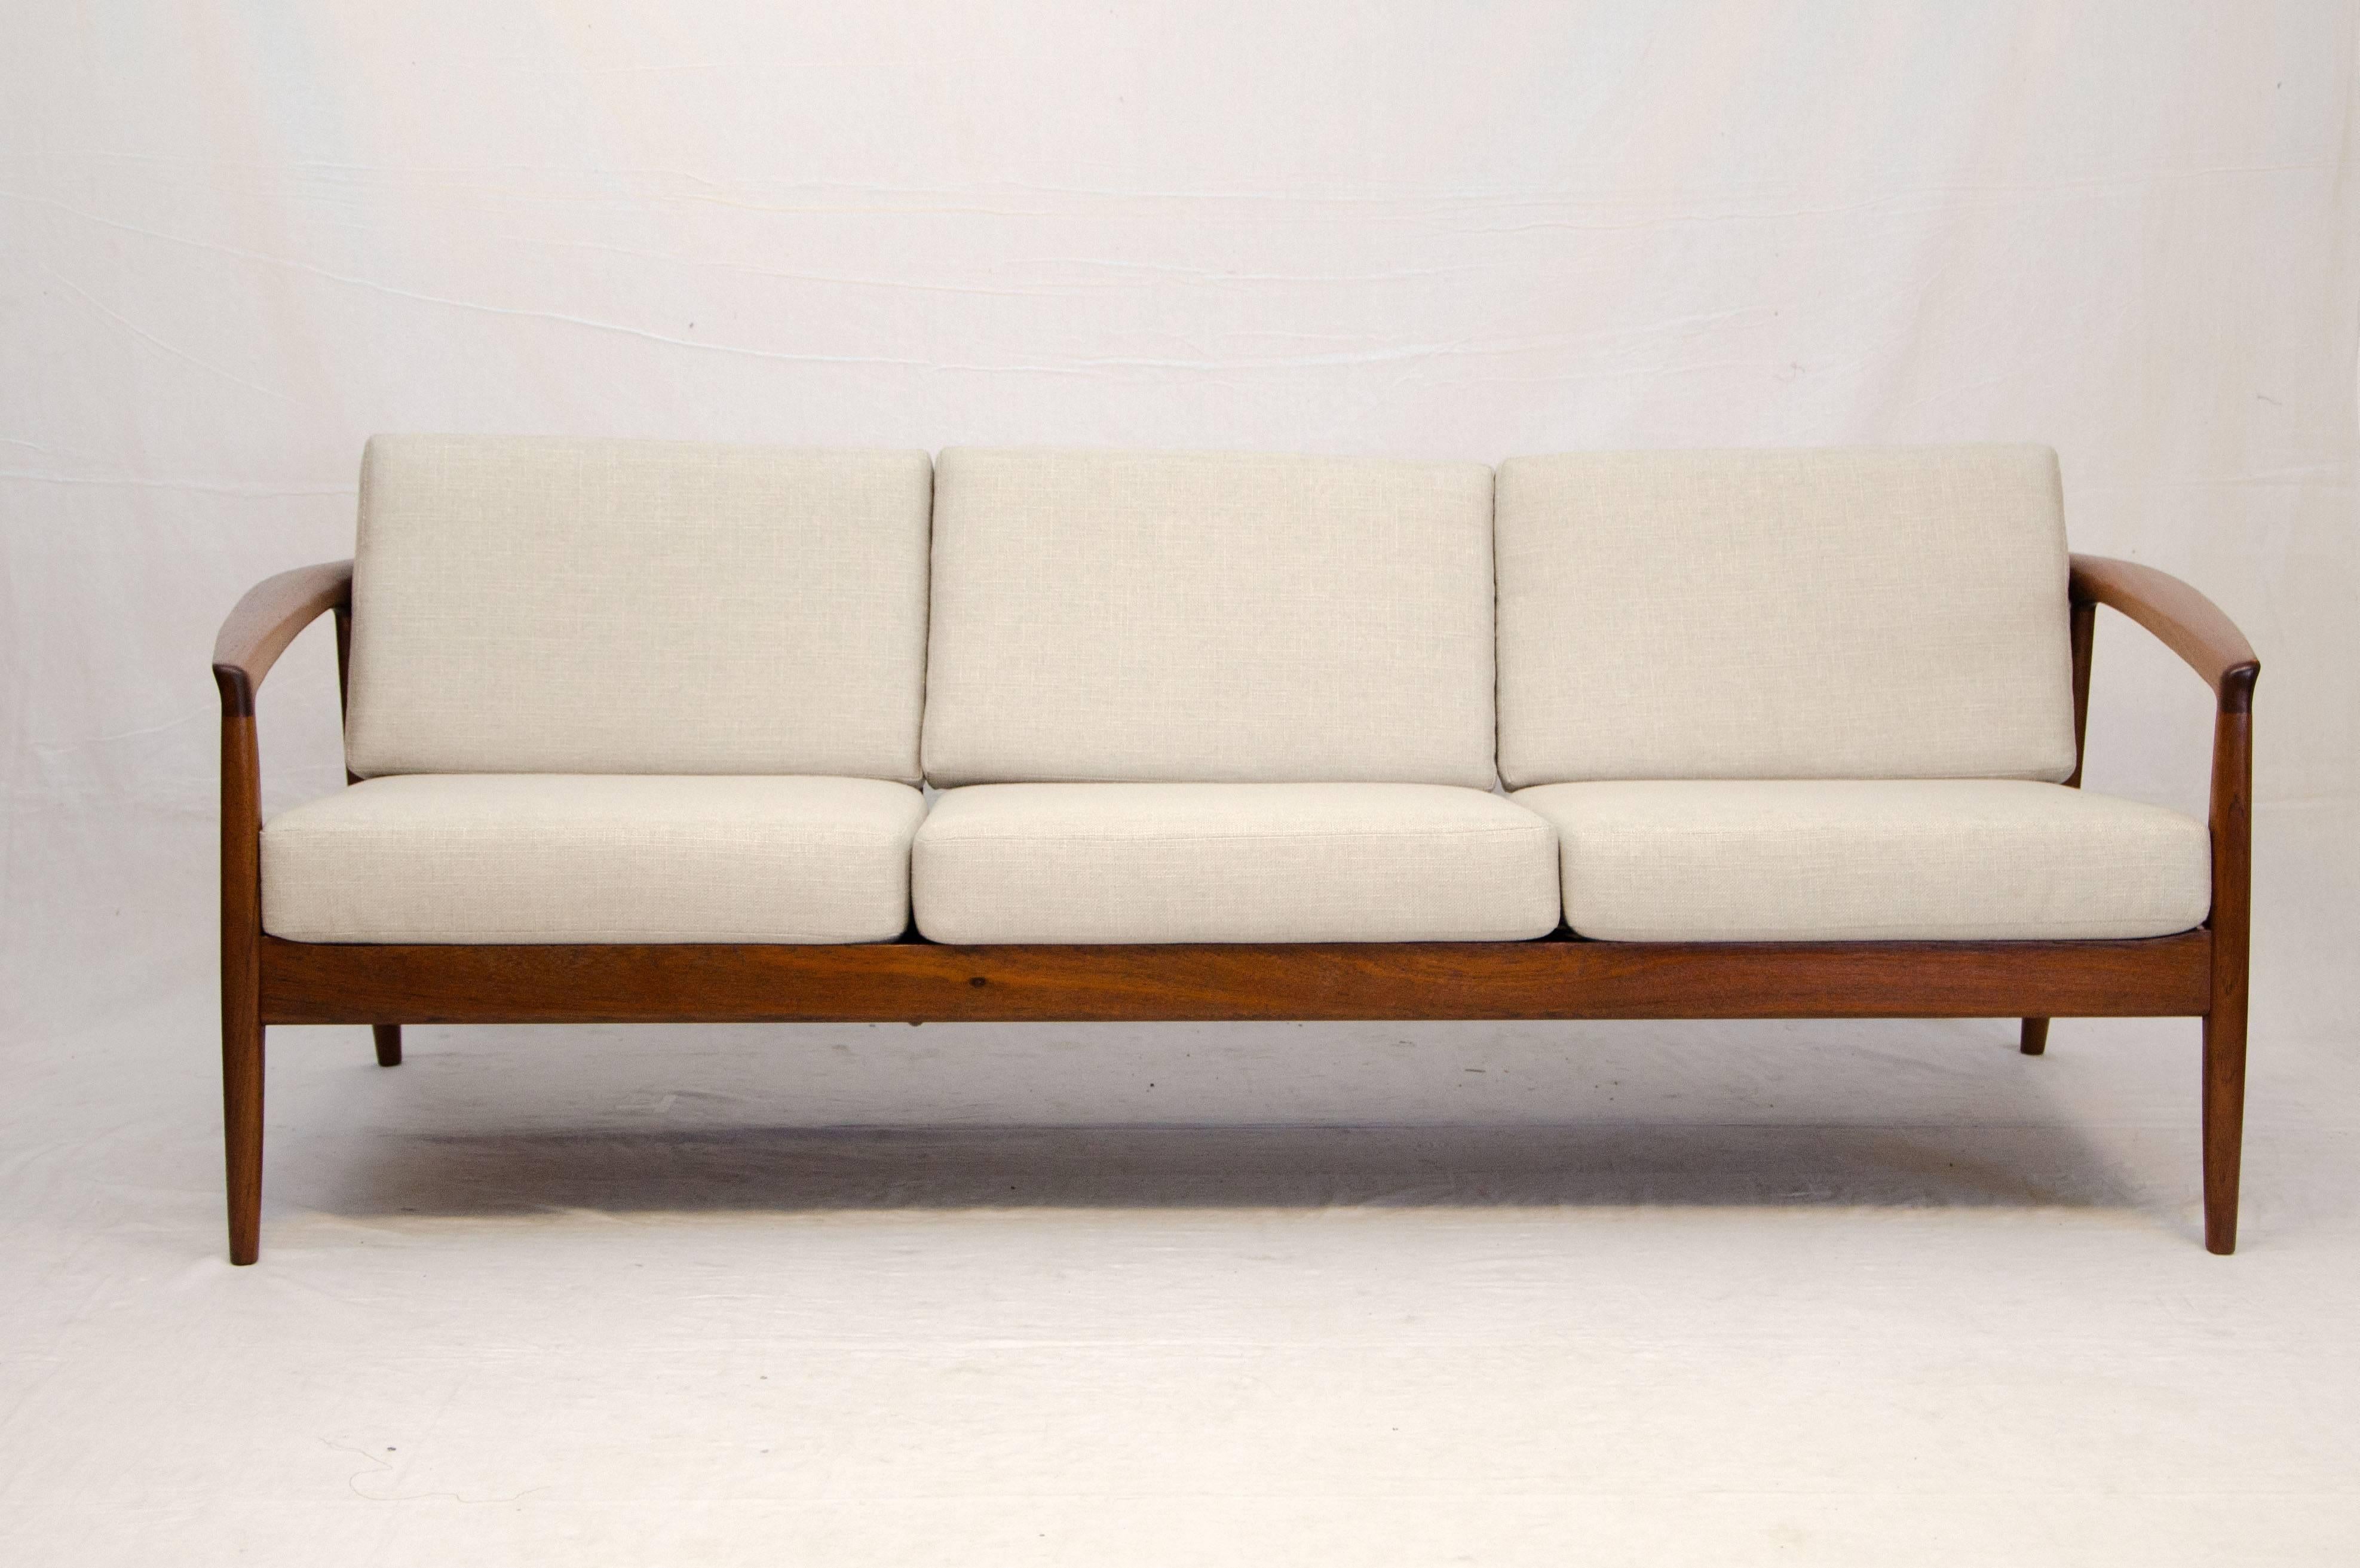 Very nice walnut sofa frame with a flowing rounded design. The strapping under the seat cushions has been replaced and the upholstery fabric and cushion interiors are new as well. The 4